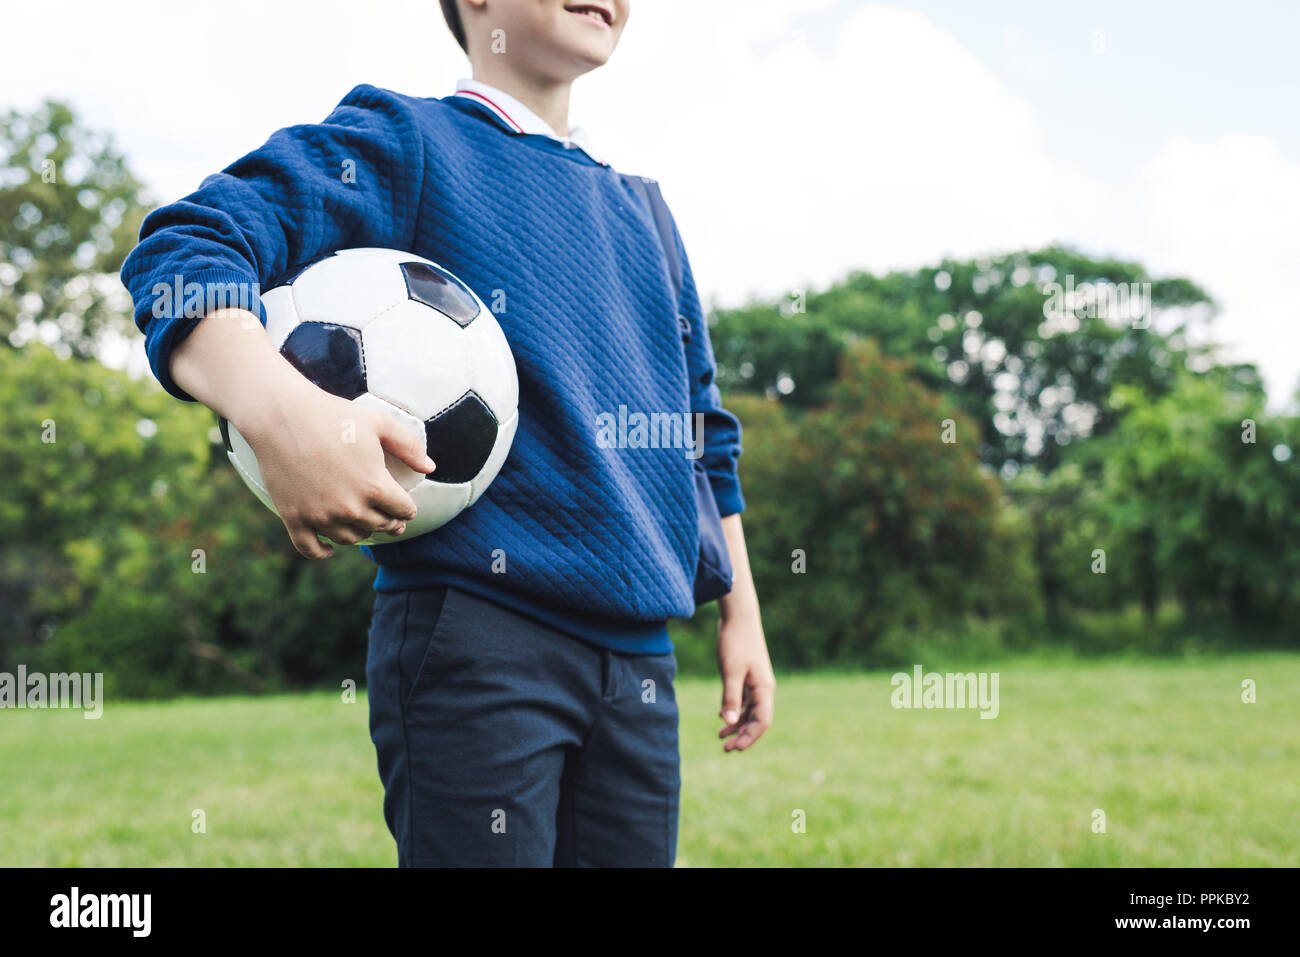 Cropped shot of kid holding soccer ball on grass field Banque D'Images